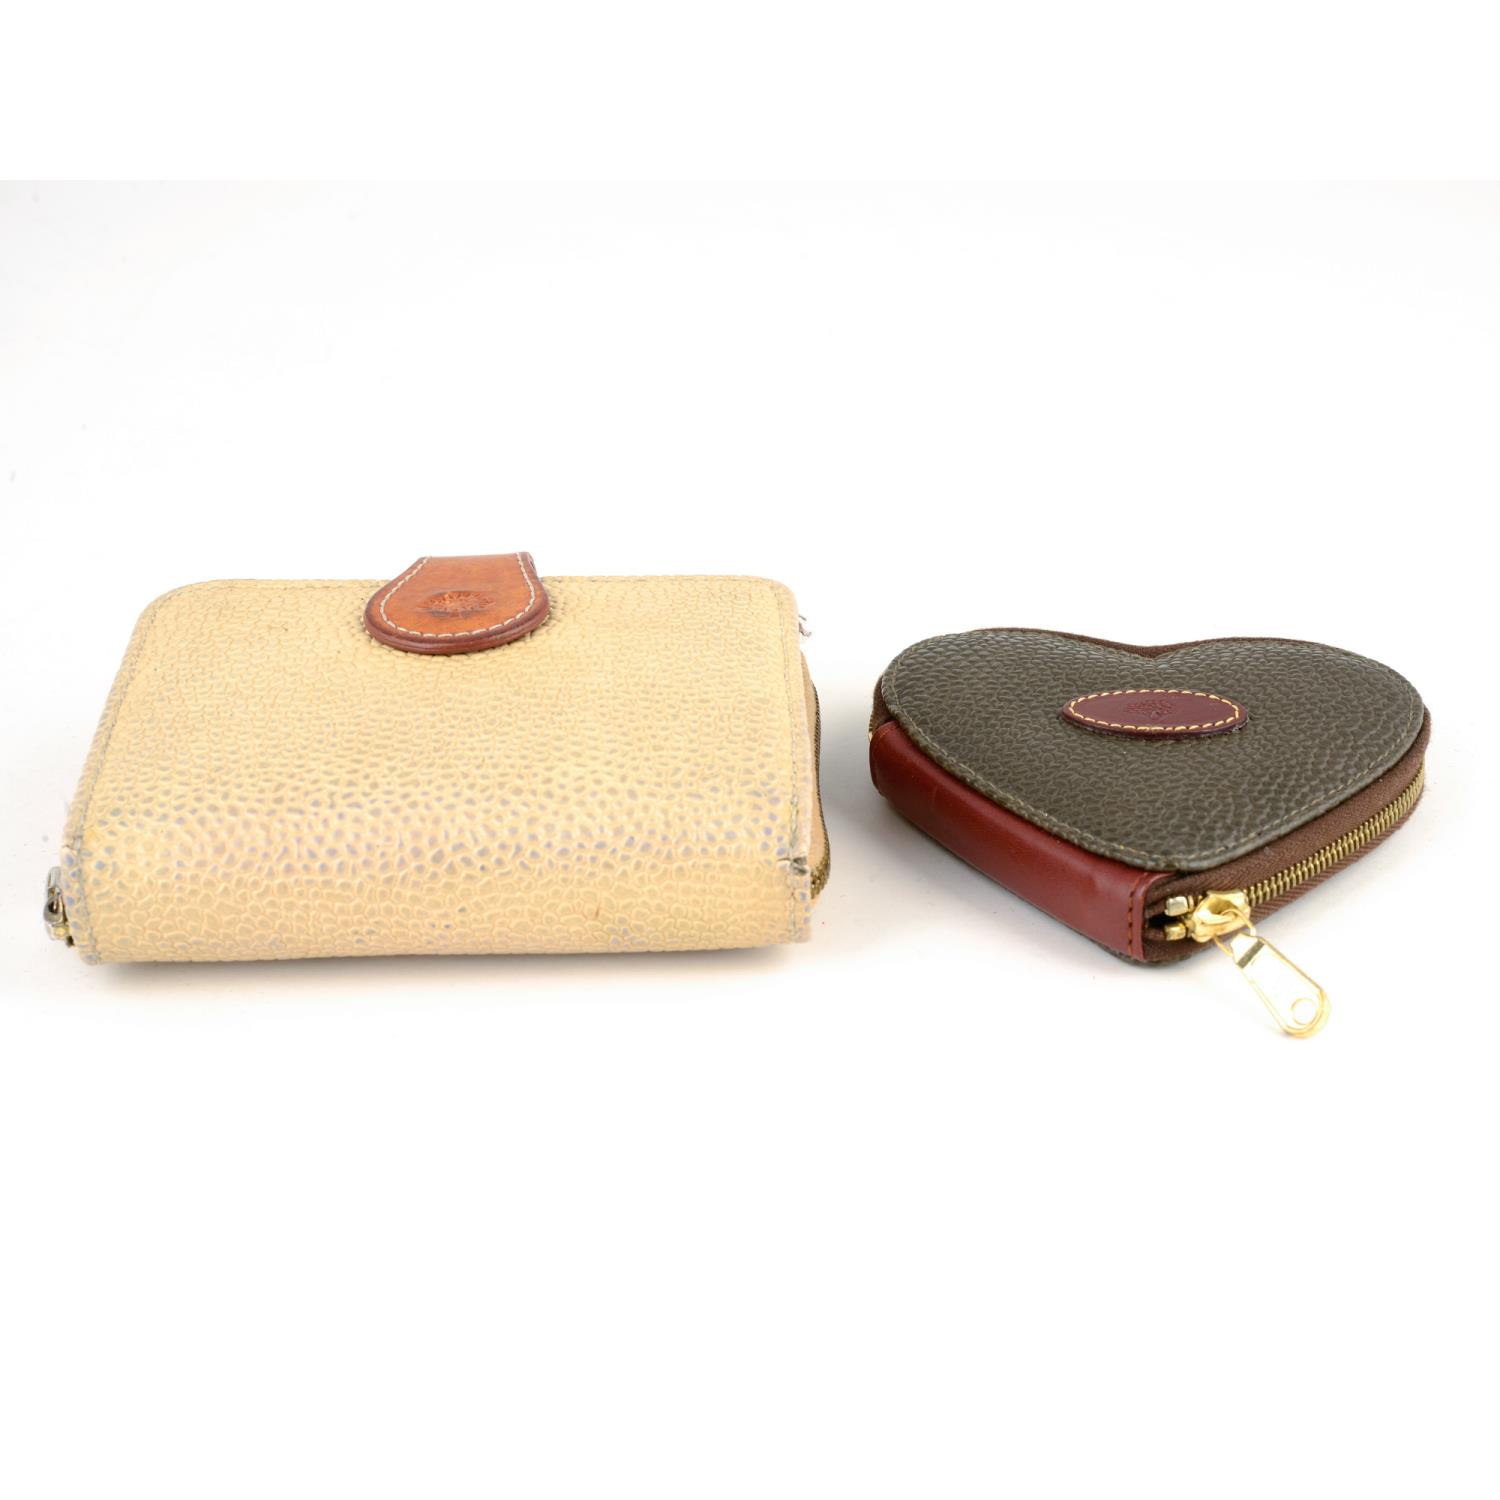 MULBERRY - two Scotchgrain purses. - Image 2 of 5